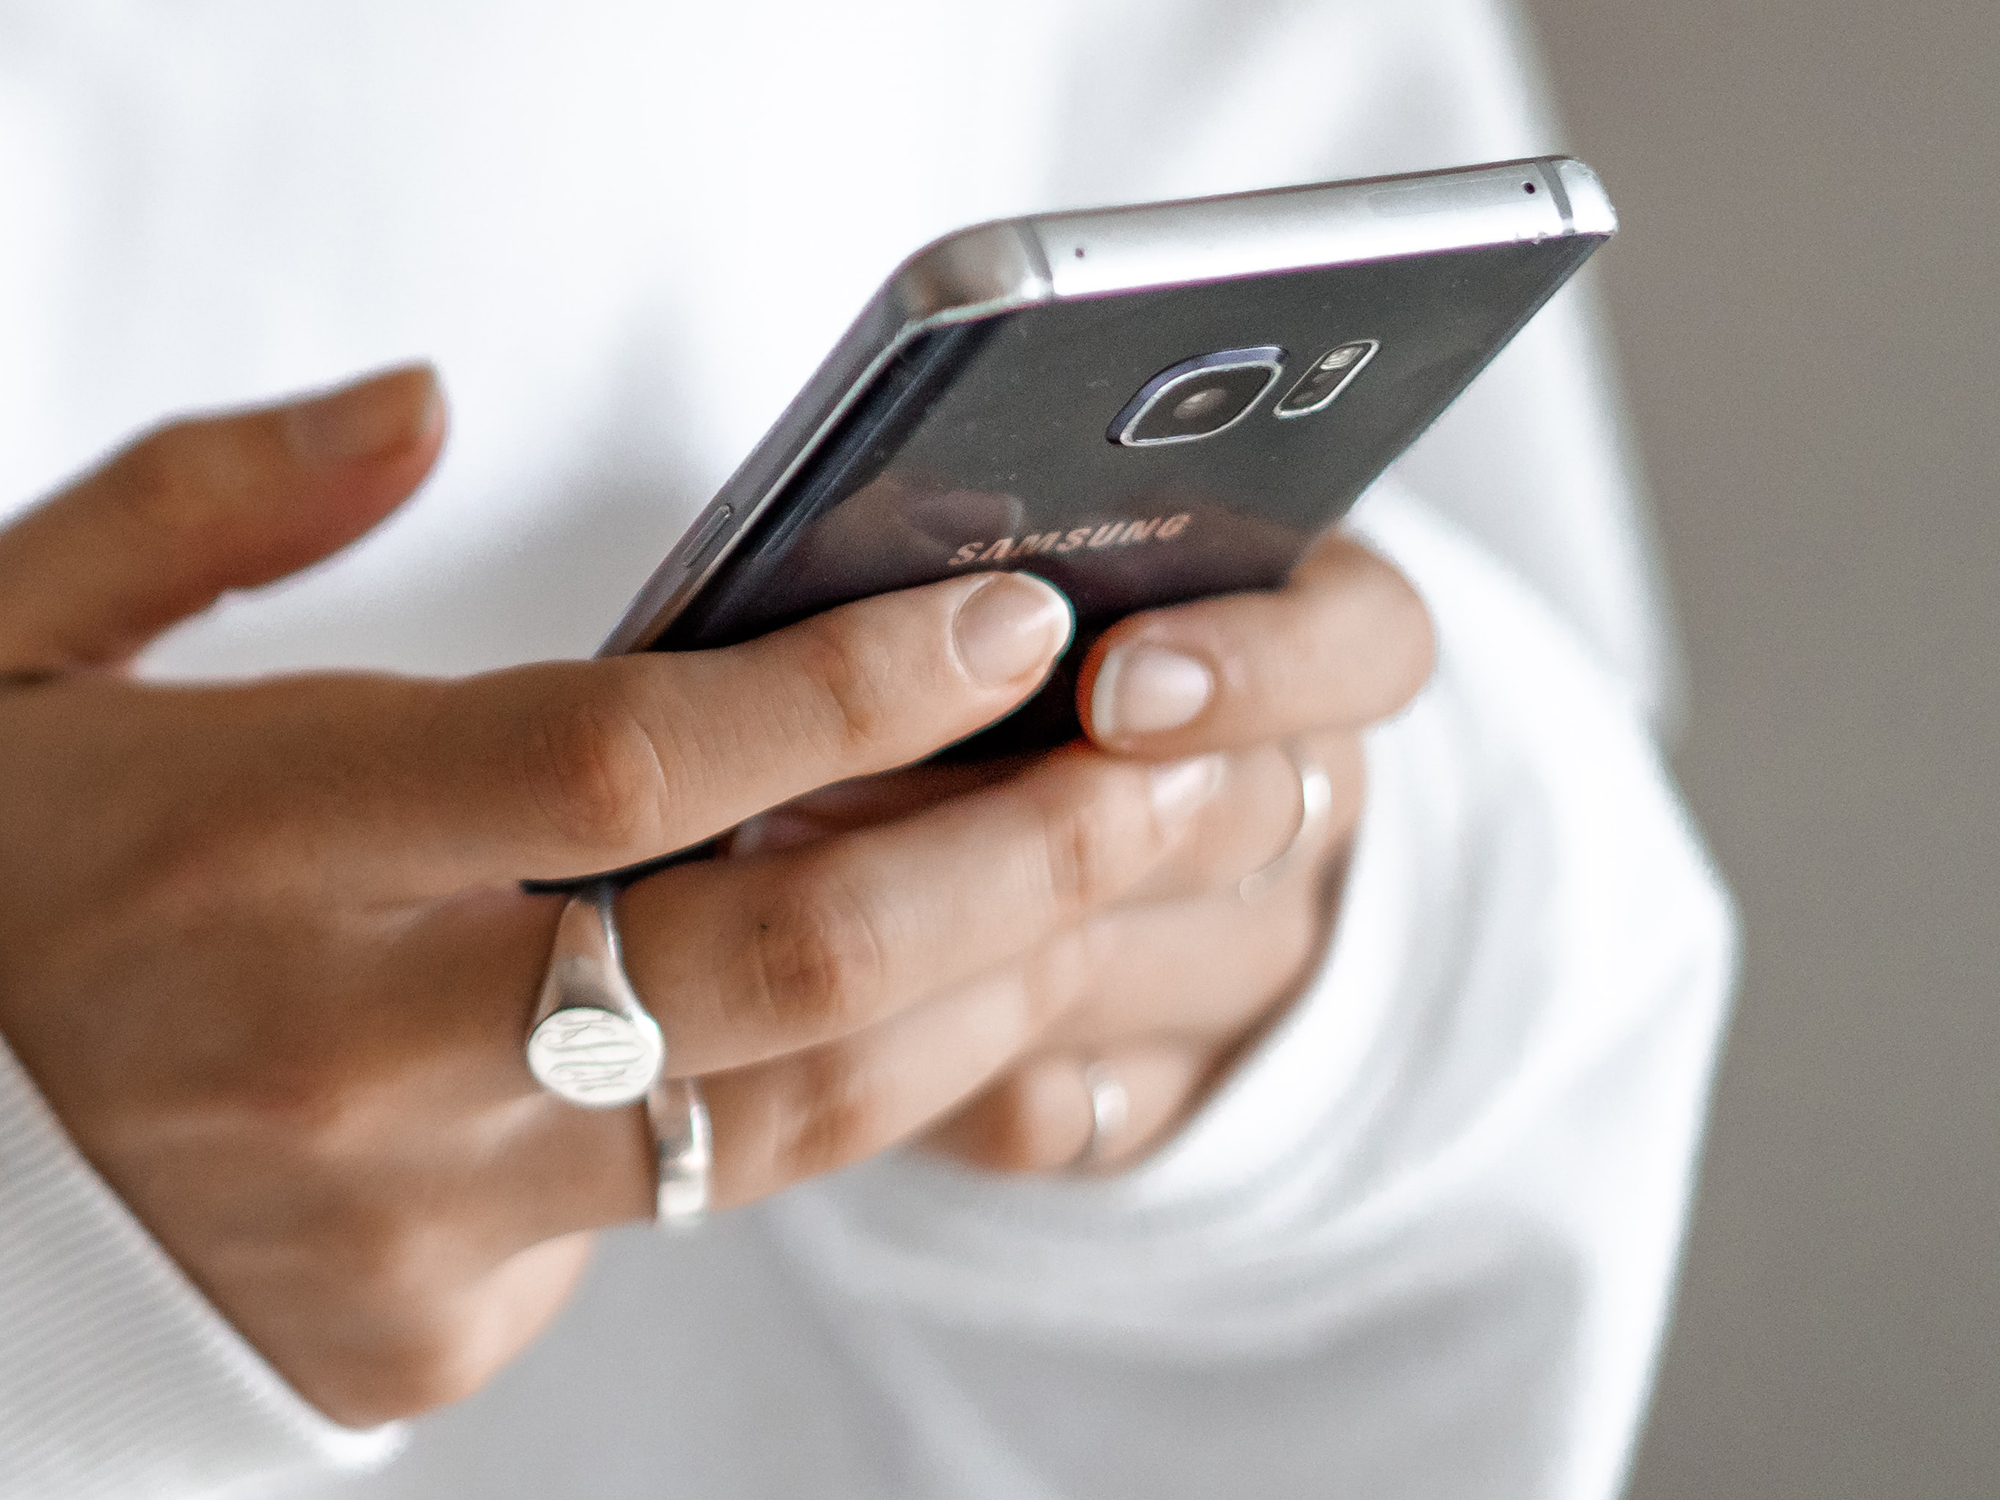 A person holding a black Android phone, possibly setting it to file transfer mode to back up their photos to their laptop.